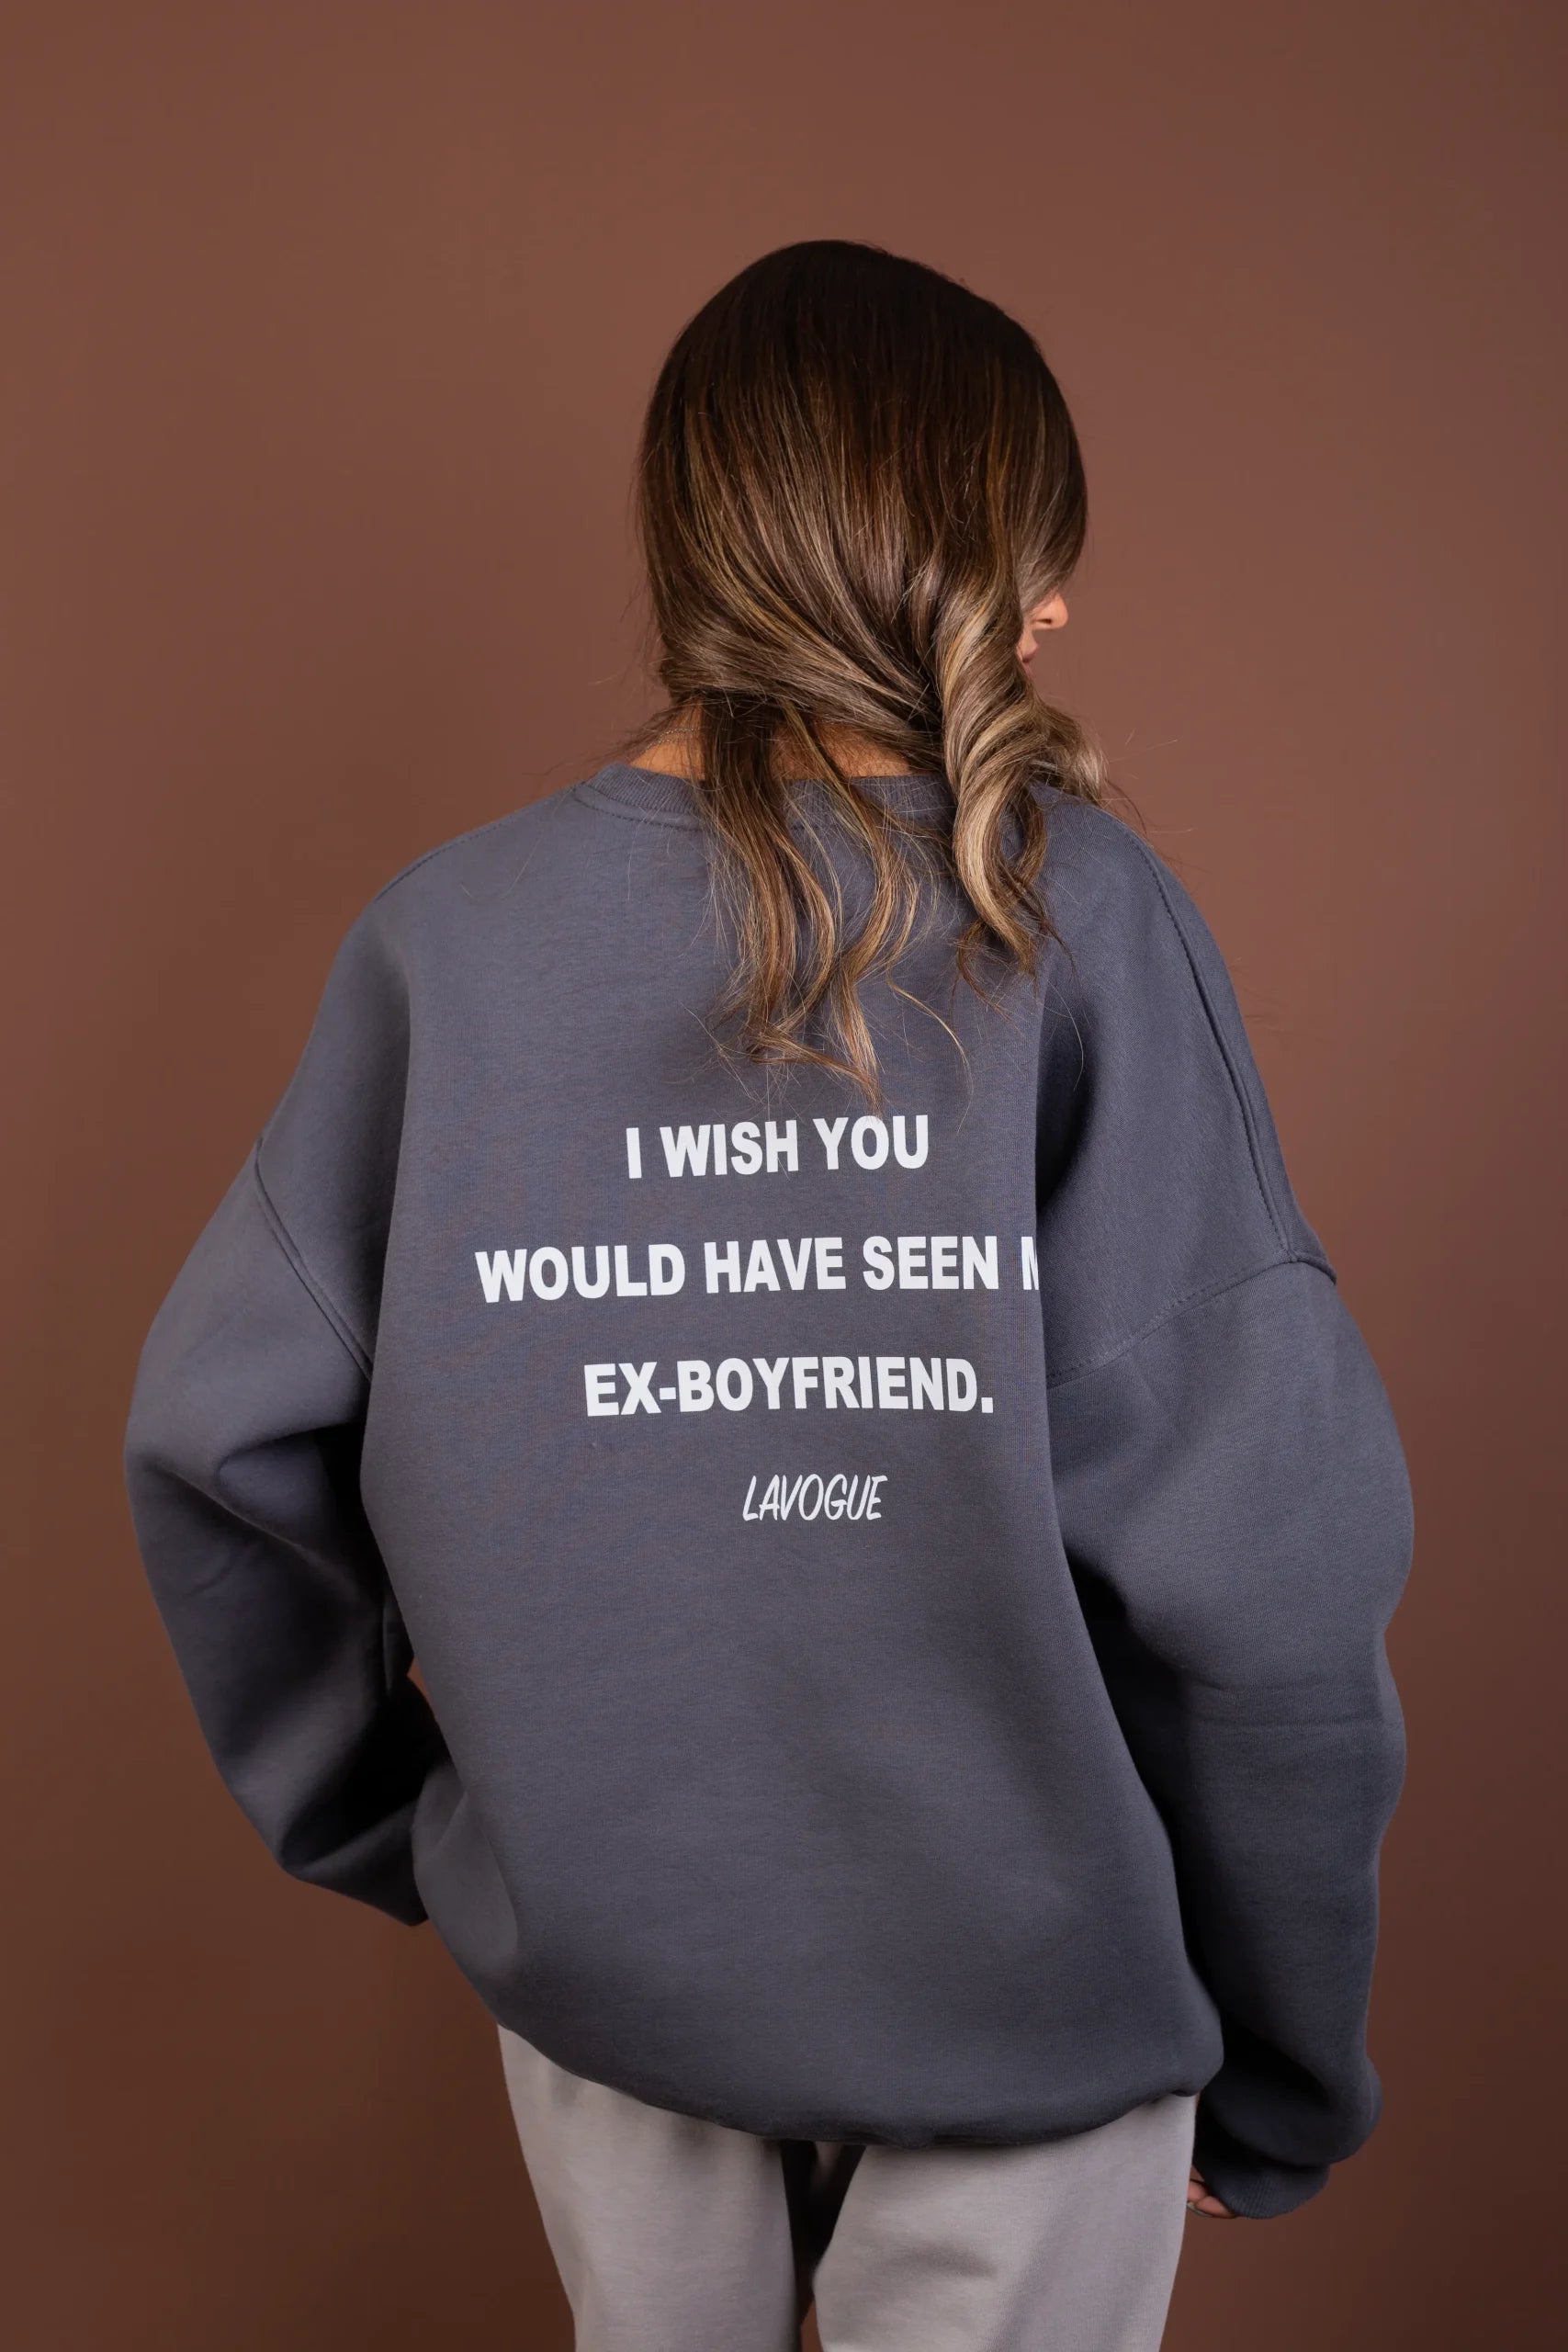 I wish you would have seen my ex-boyfriend